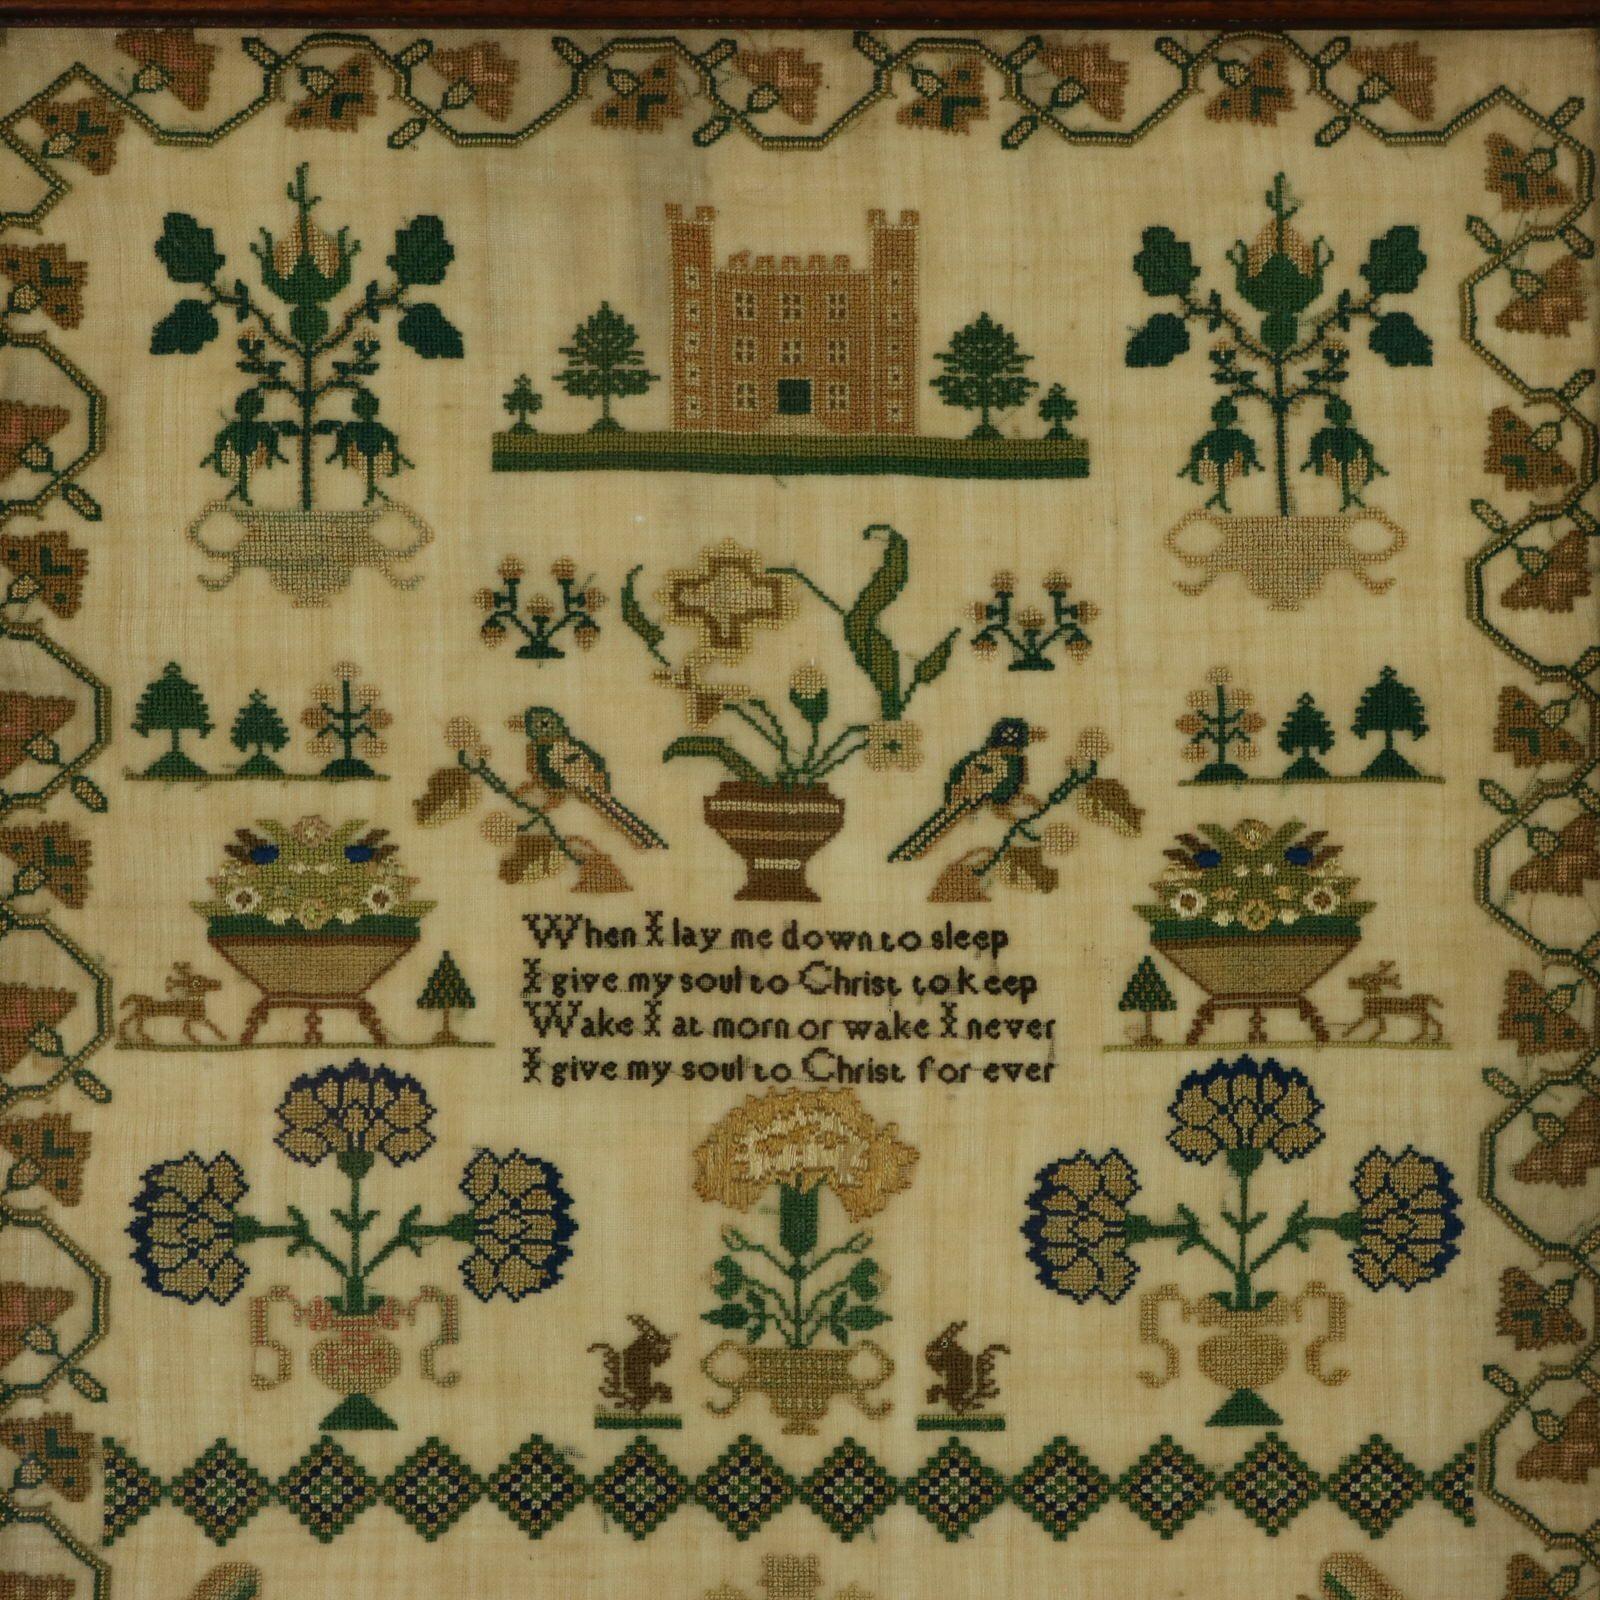 Victorian Sampler, stitched in 1839 by Elizabeth Higgins Aged 14. The sampler is worked in silk threads on a linen ground, mainly in cross stitch. Meandering floral border. Colours green, light brown, dark brown, gold, pink, silver and blue. Verse